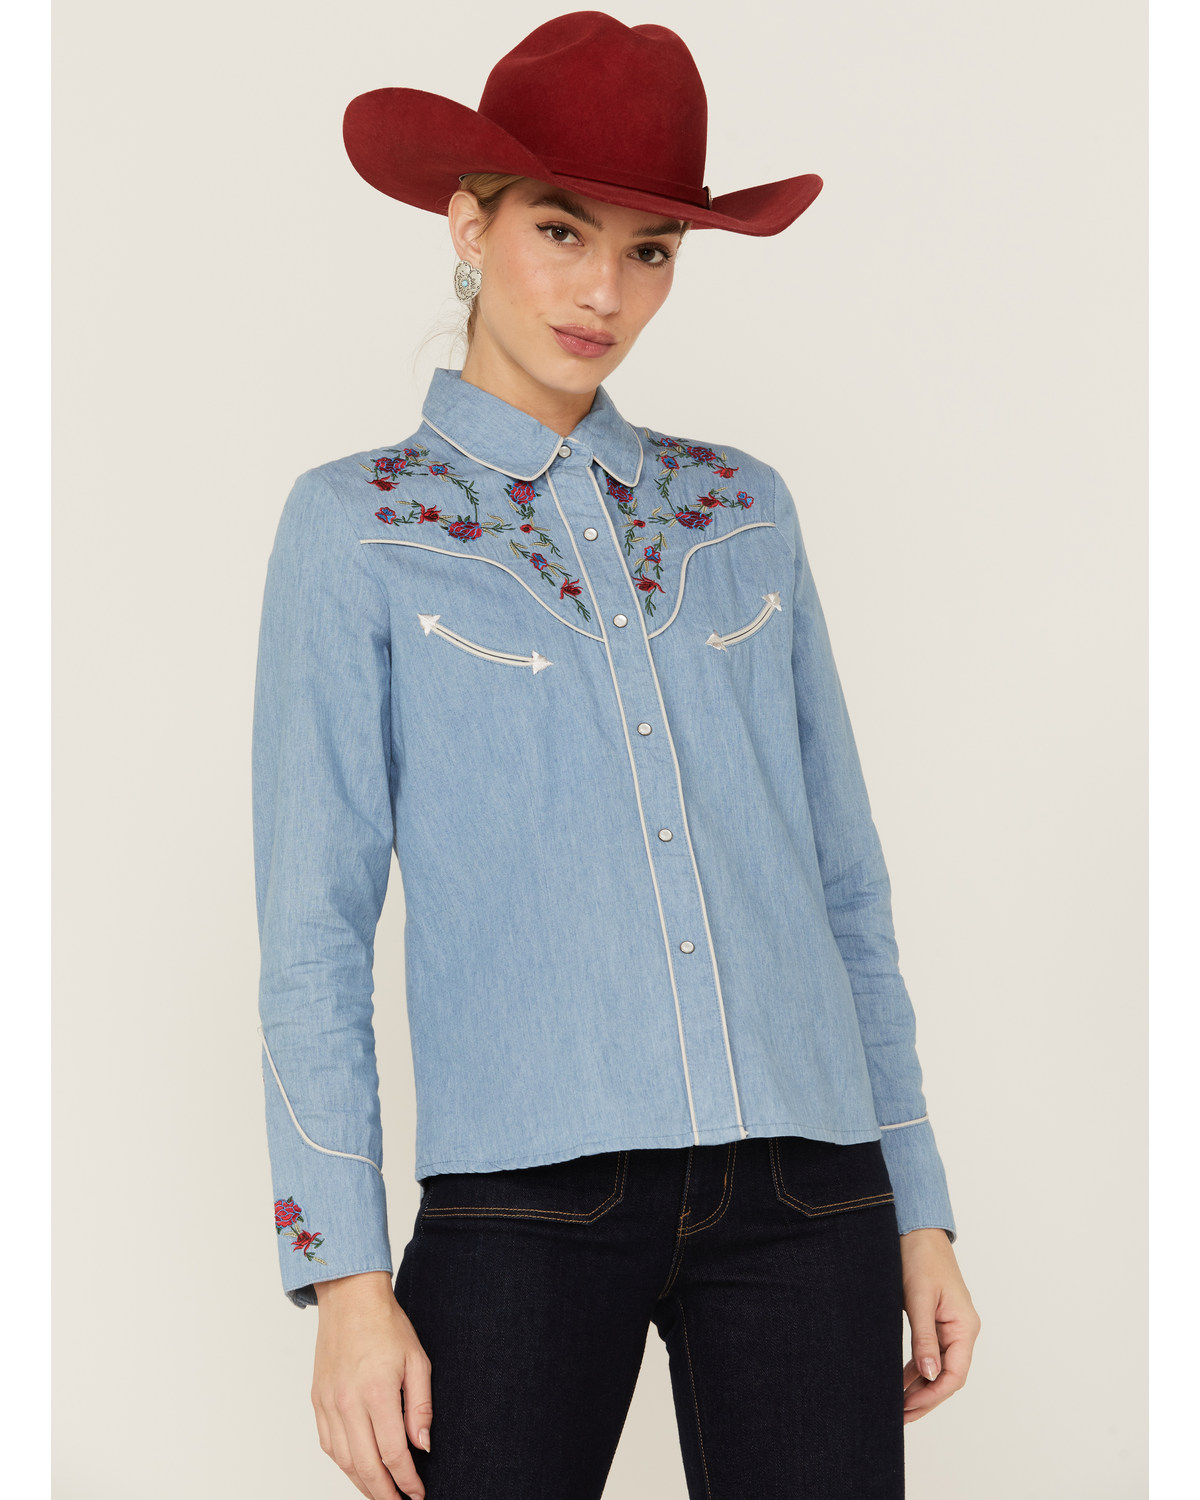 Scully Women's Chambray Floral Embroidered Yoke Pearl Snap Western Shirt